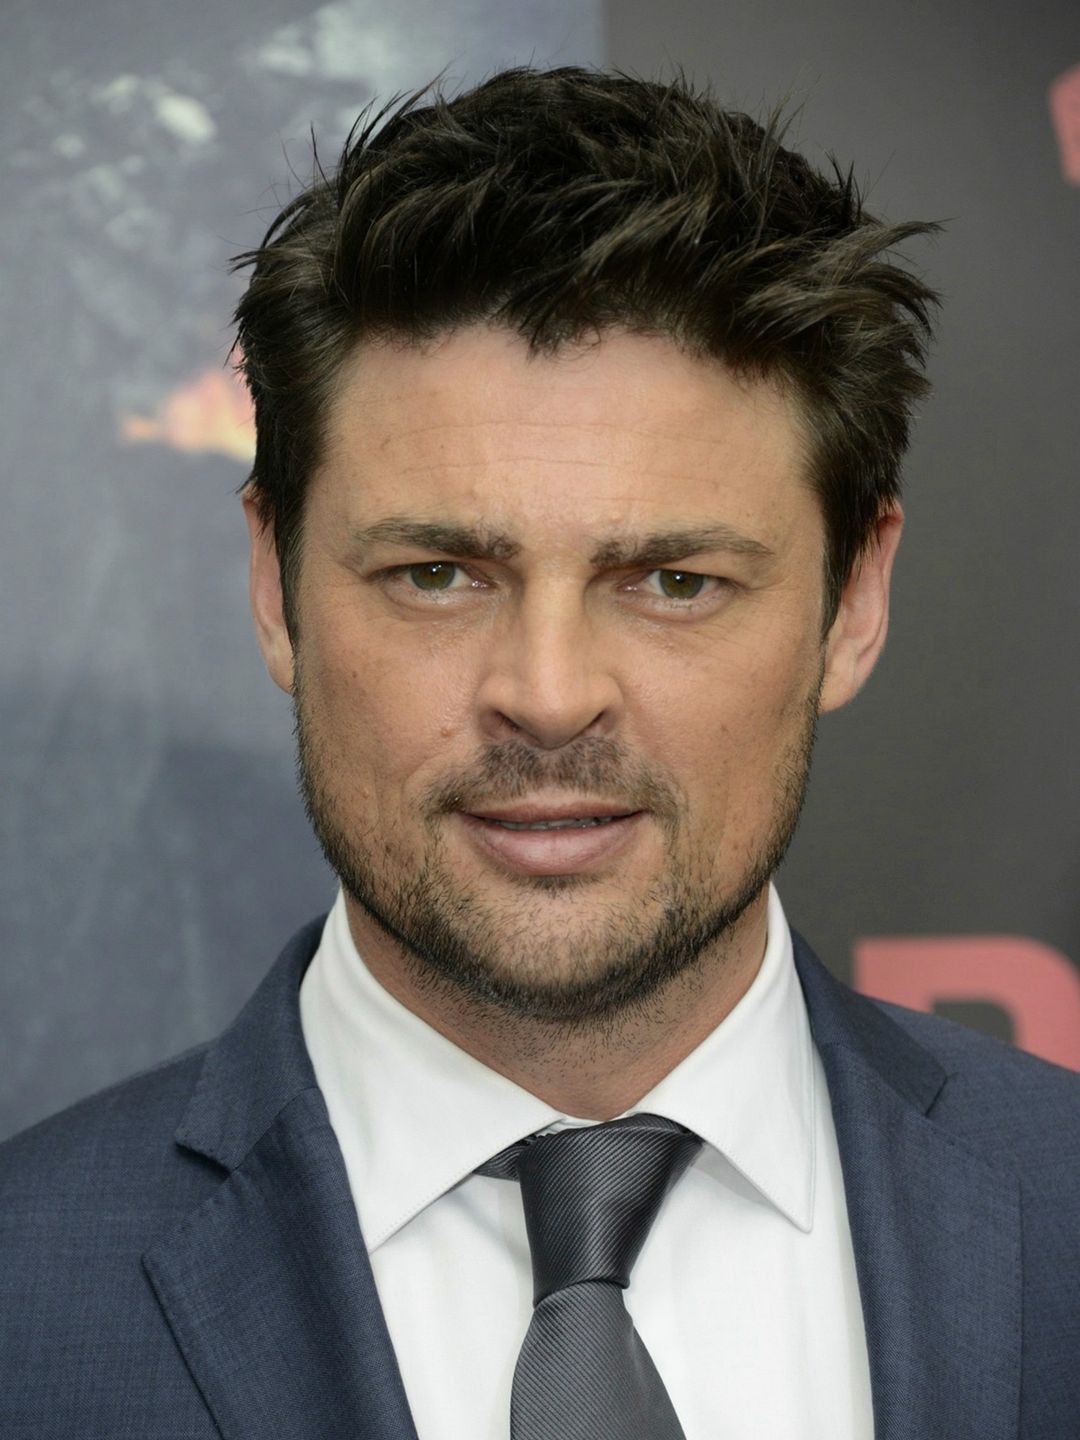 Karl Urban who is his father